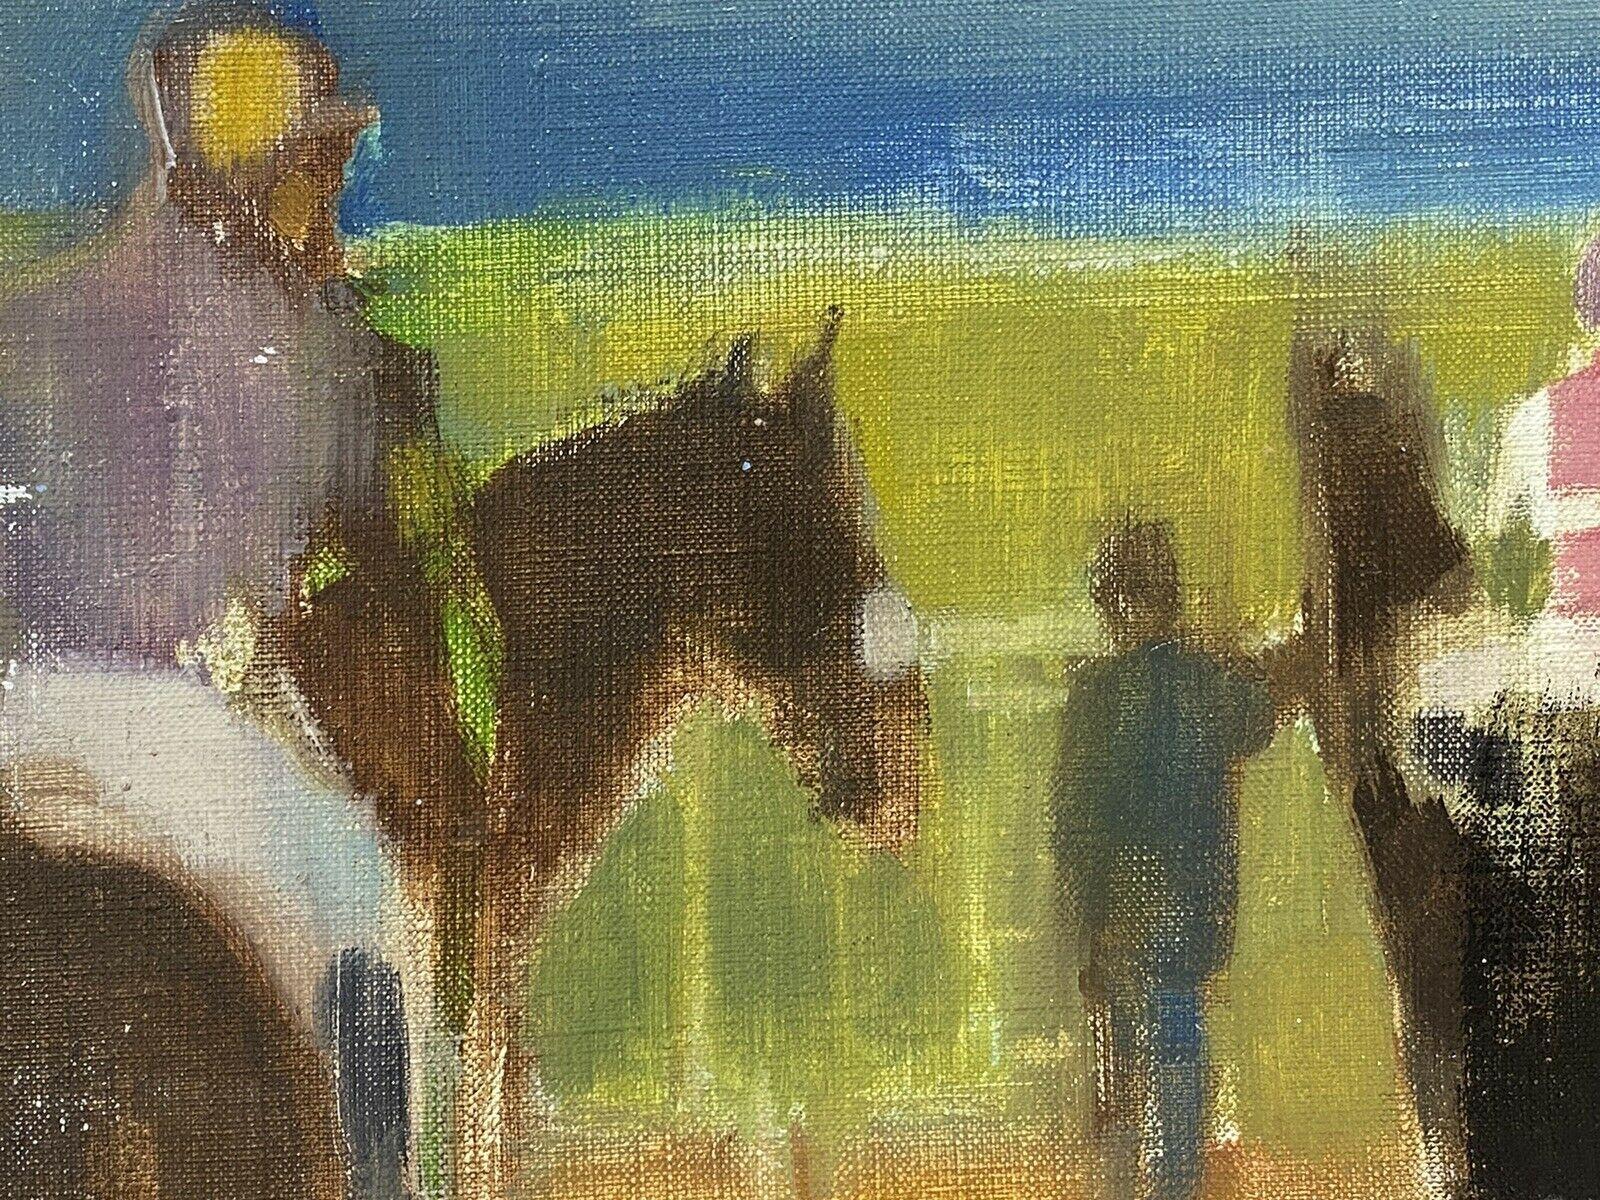 Artist/ School: R. Leroy (French b. 1932)

Title: Race horses in the Paddock

Medium: oil painting on canvas

Size: painting: 6.25 x 9.75 inches

Provenance: all the paintings we have for sale by this artist, came the artists studio in